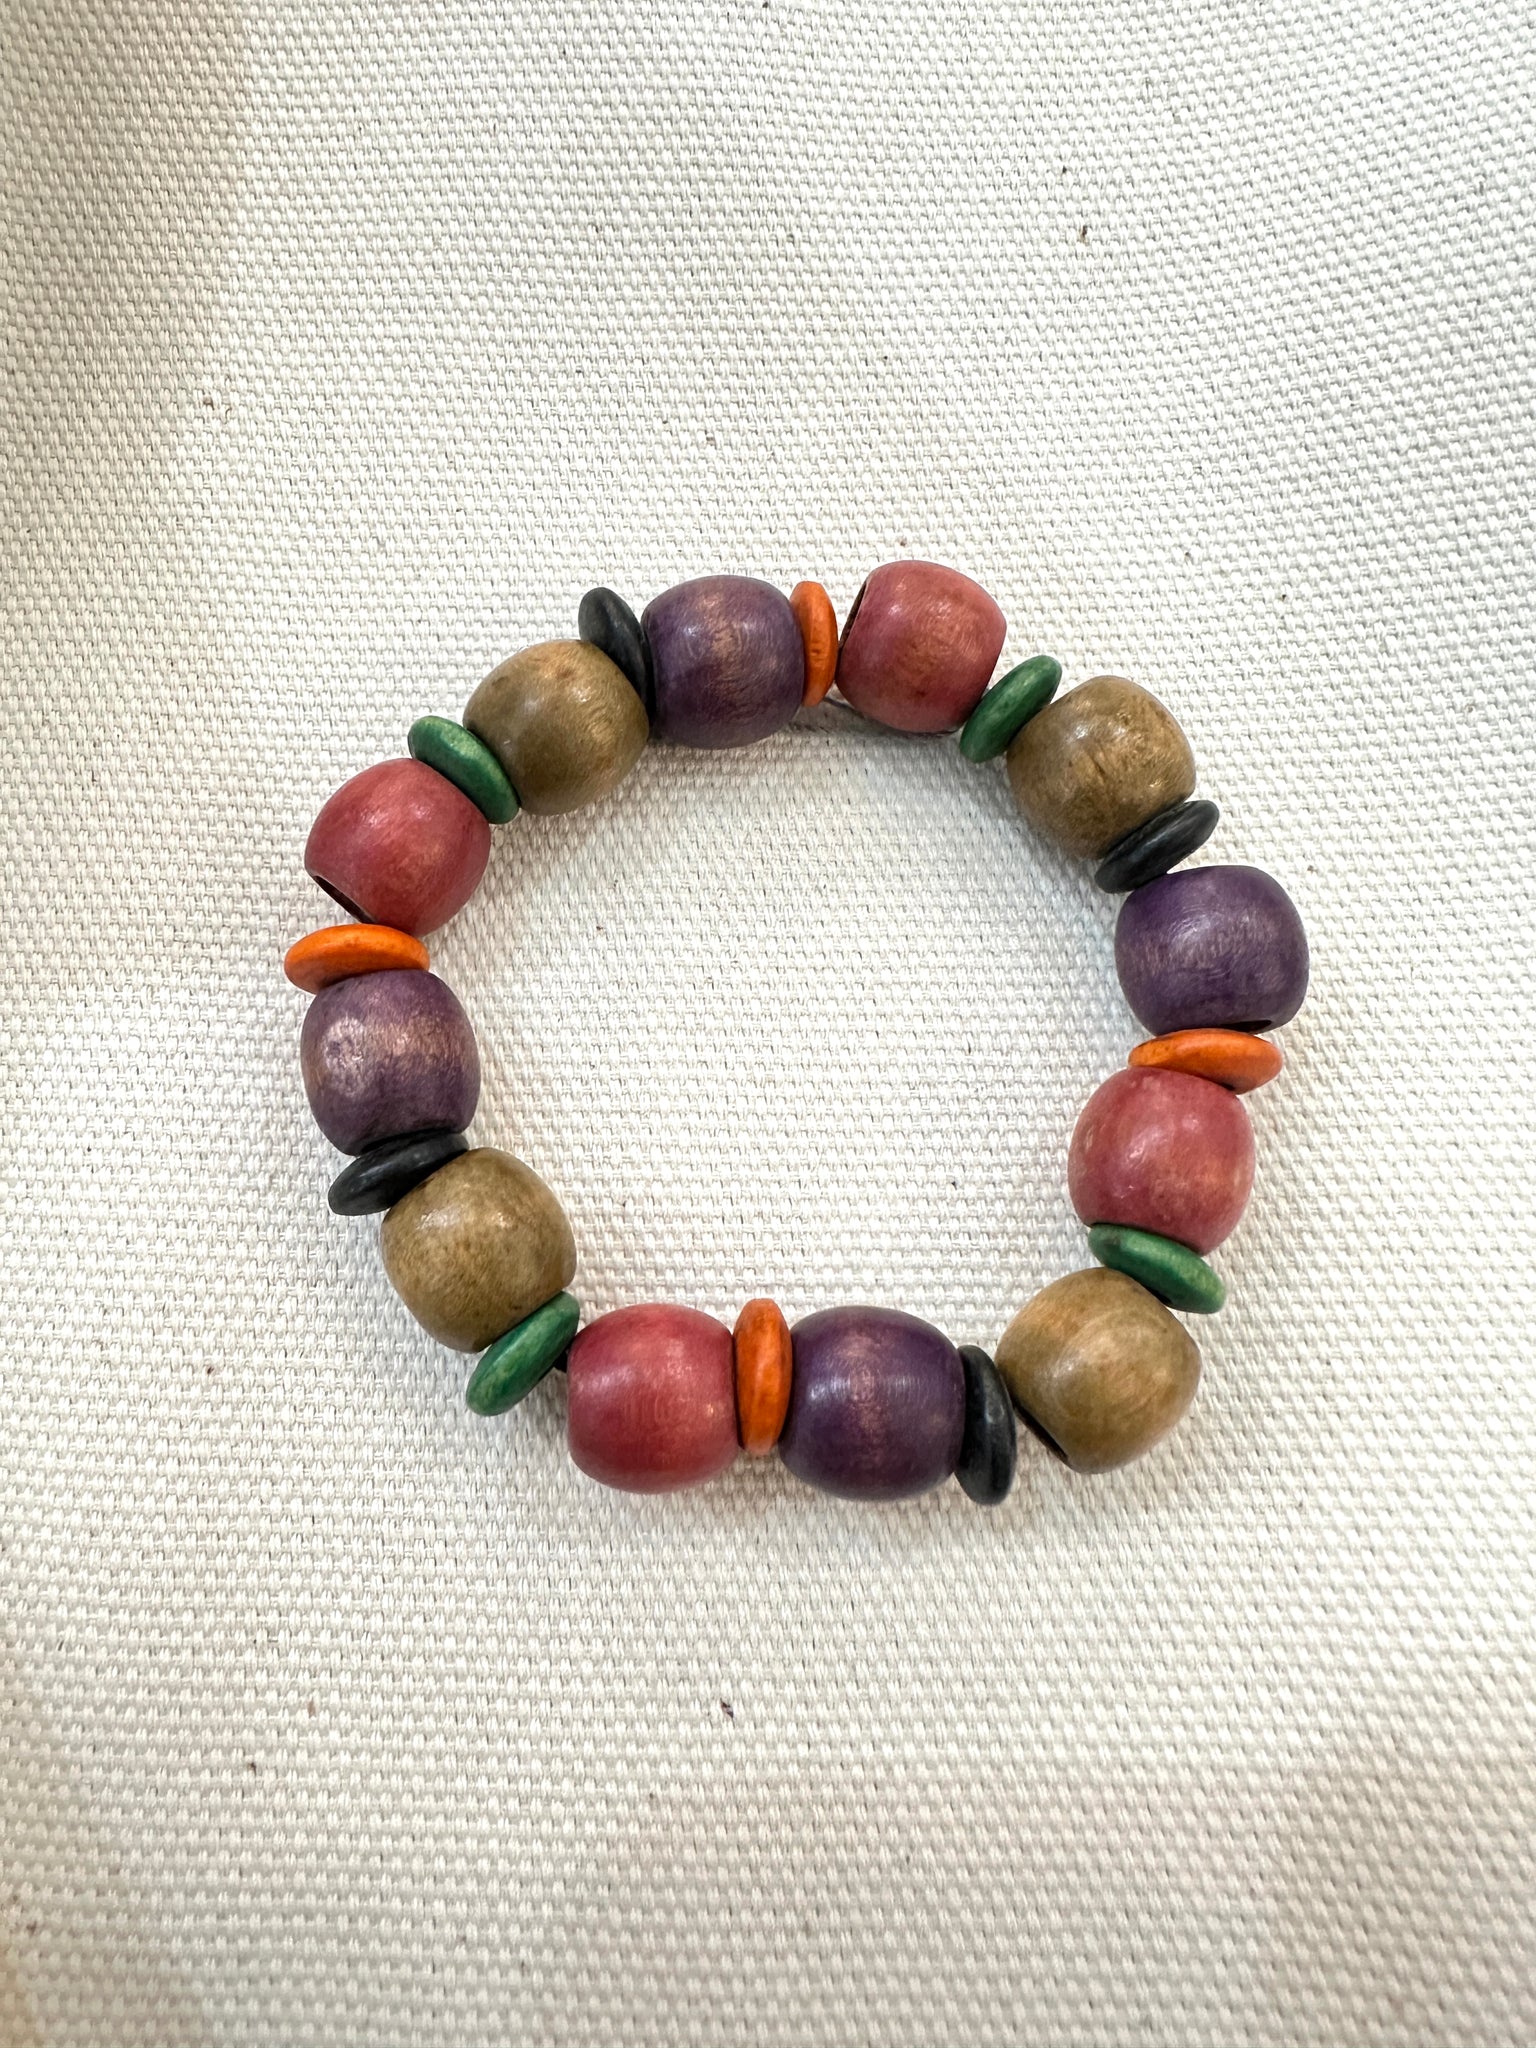 Handcrafted Colorful Wood Mixed Beaded Stretch Bracelet